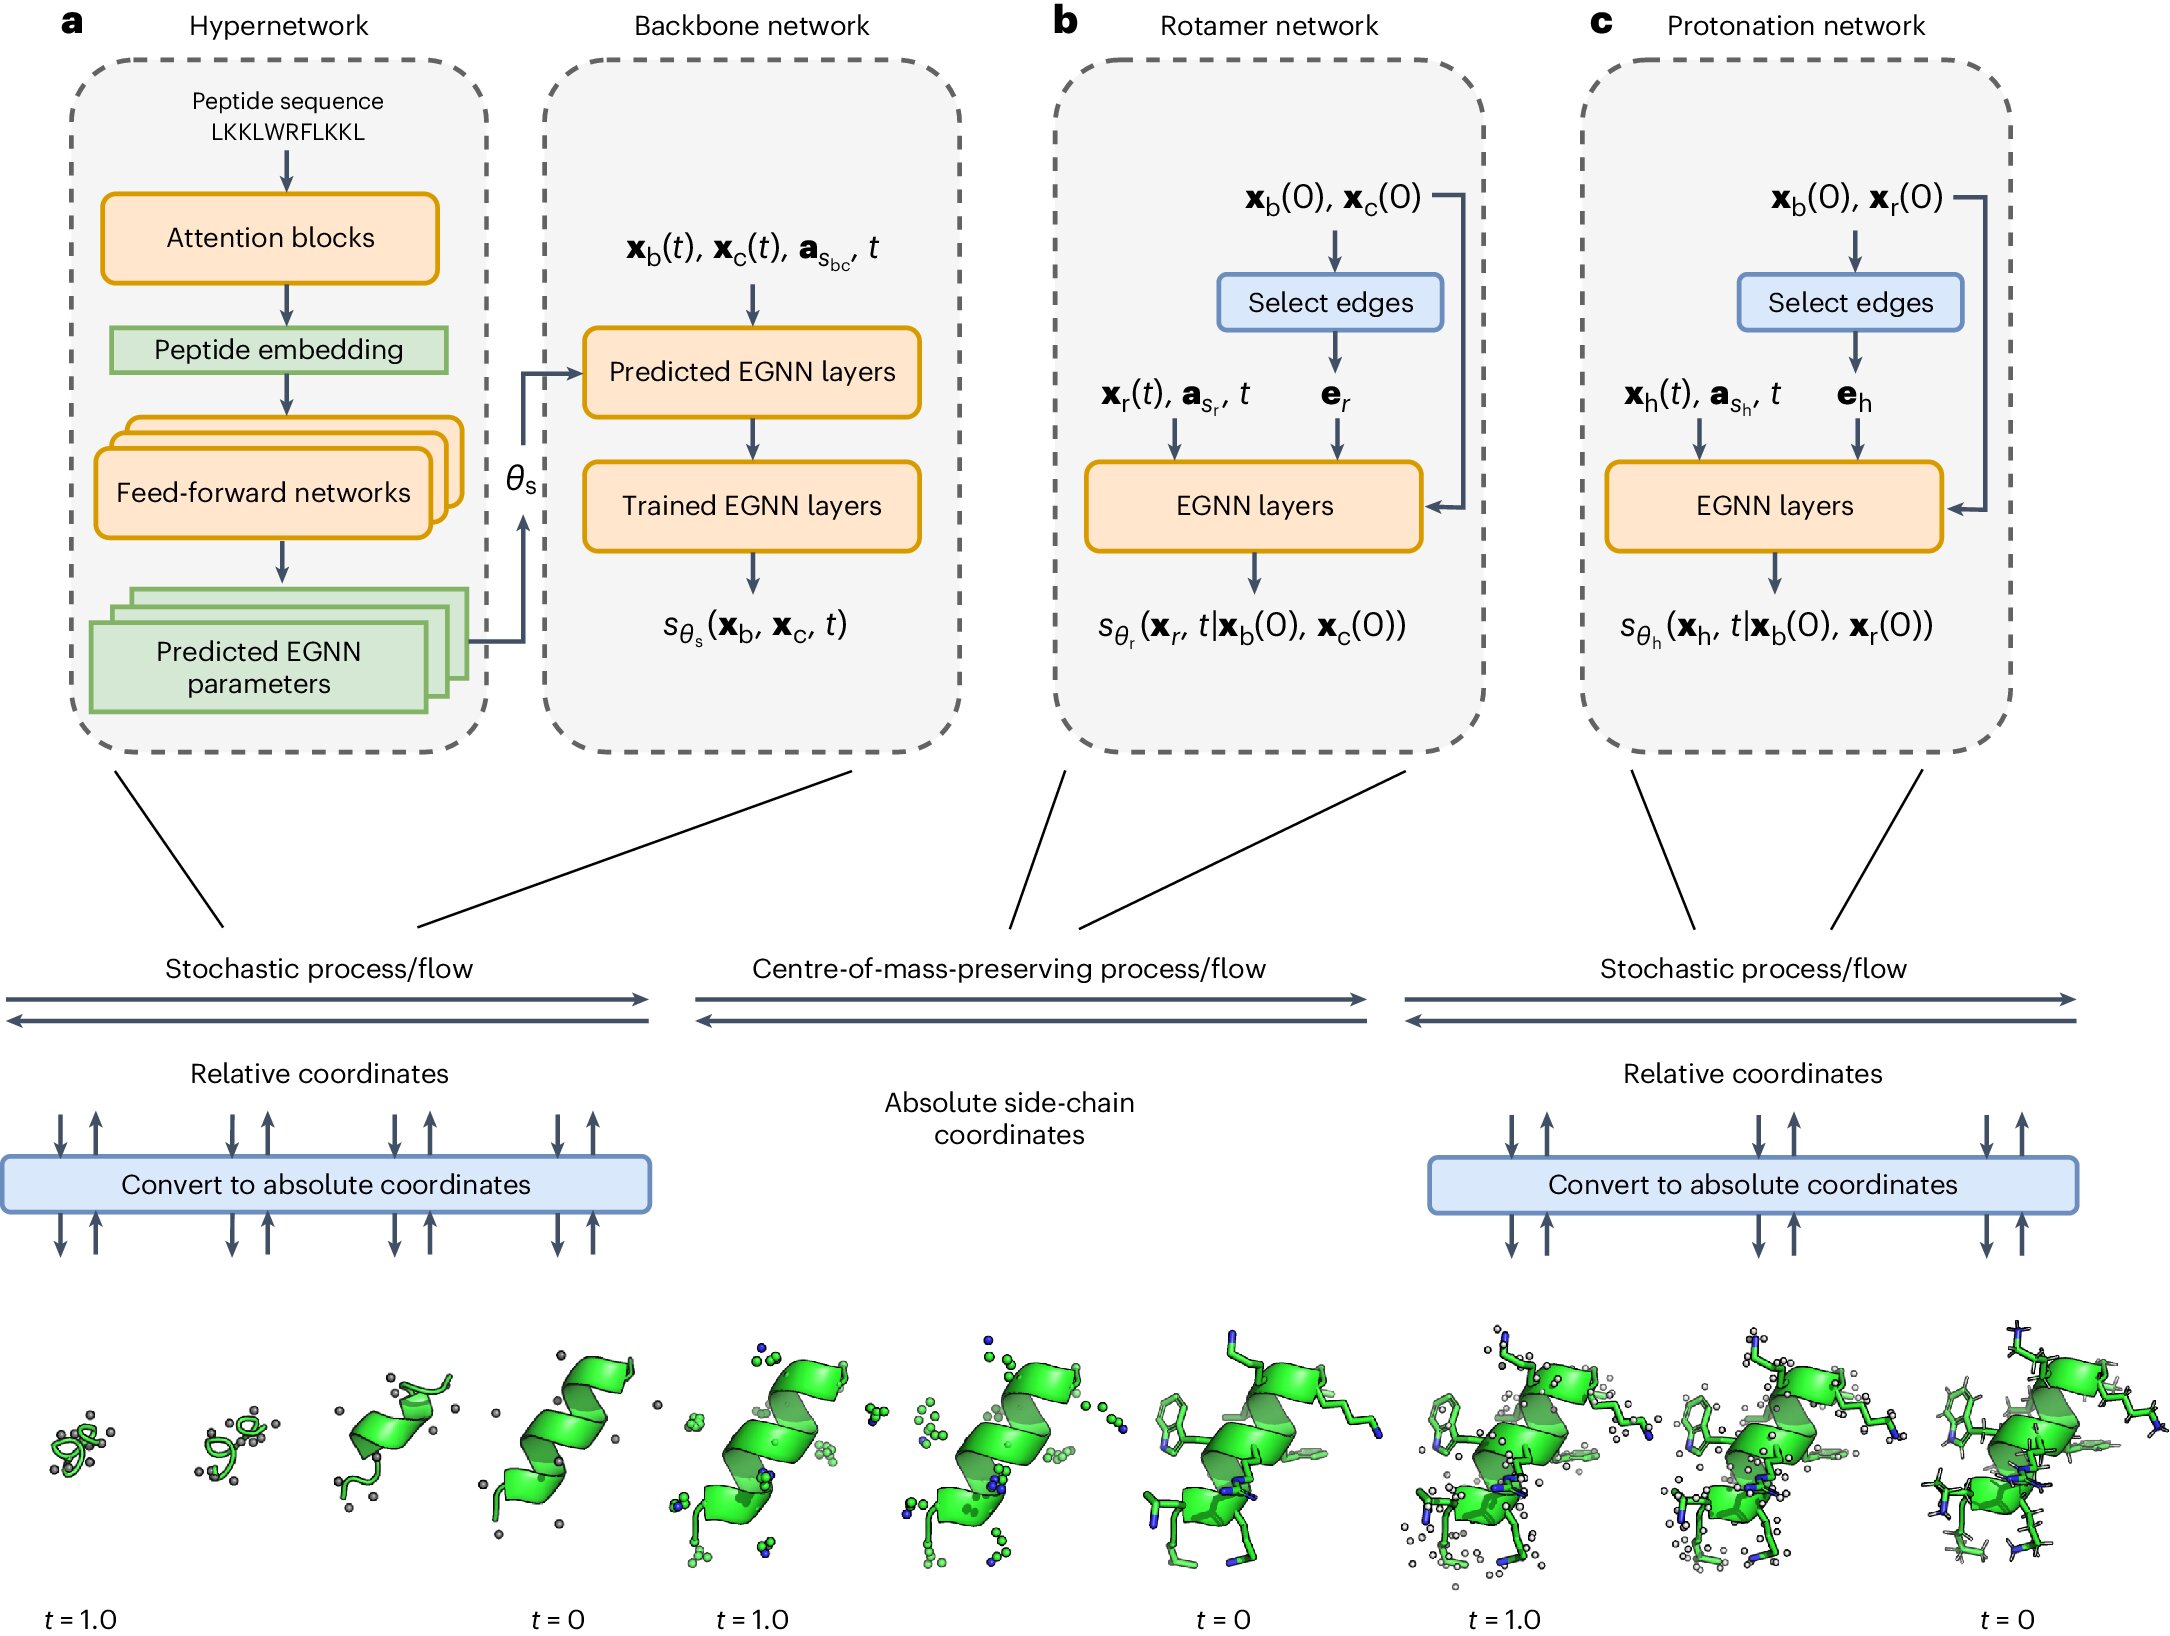 Researchers develop deep learning model that outperforms Google AI system in predicting peptide structures